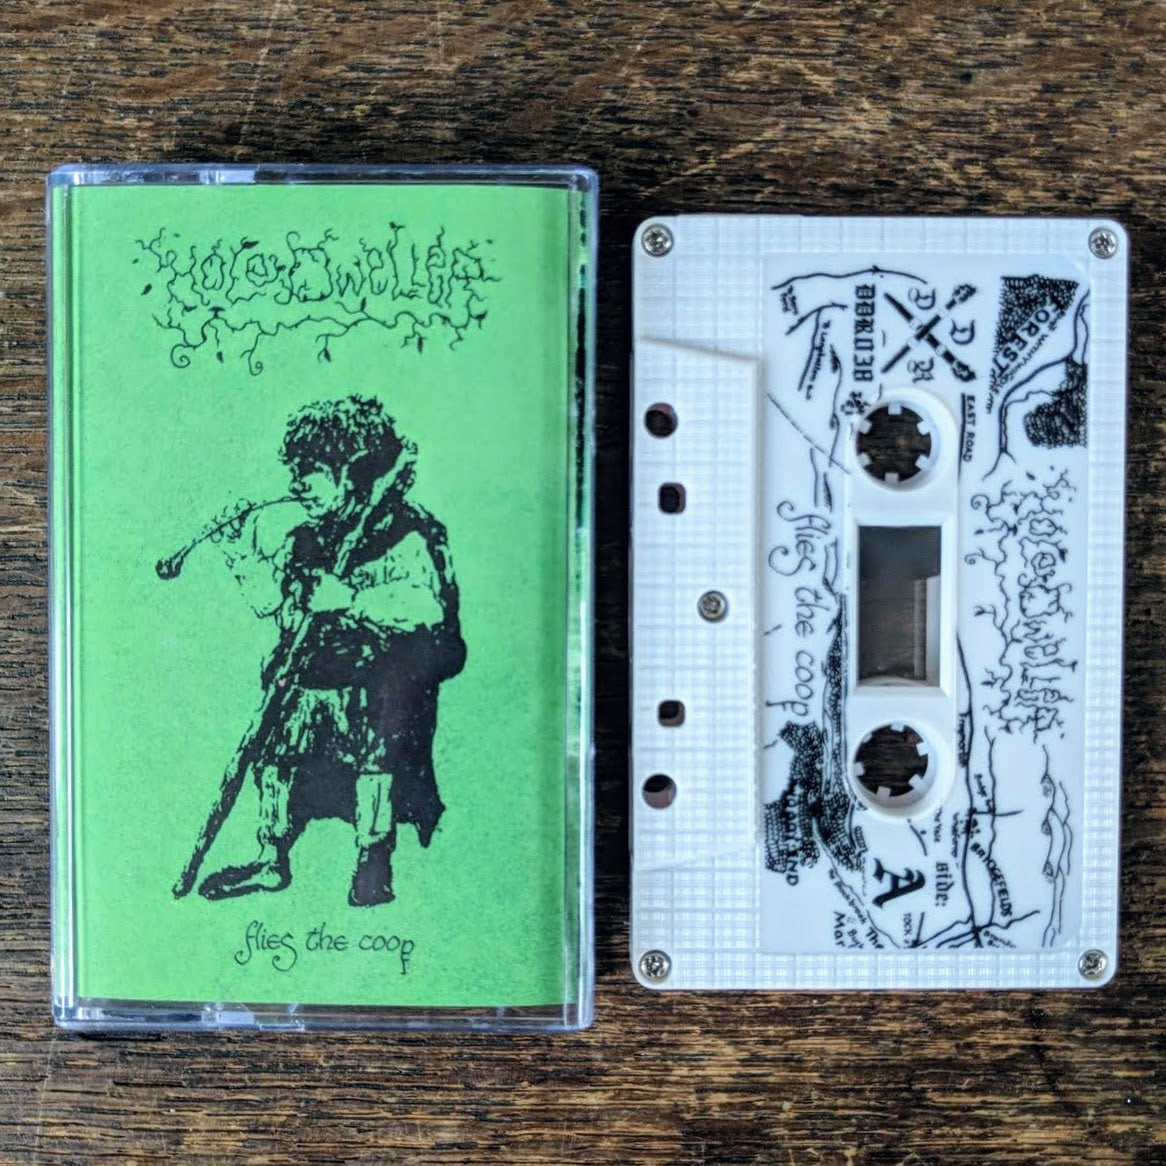 [SOLD OUT] HOLE DWELLER "Flies the Coop" Cassette Tape